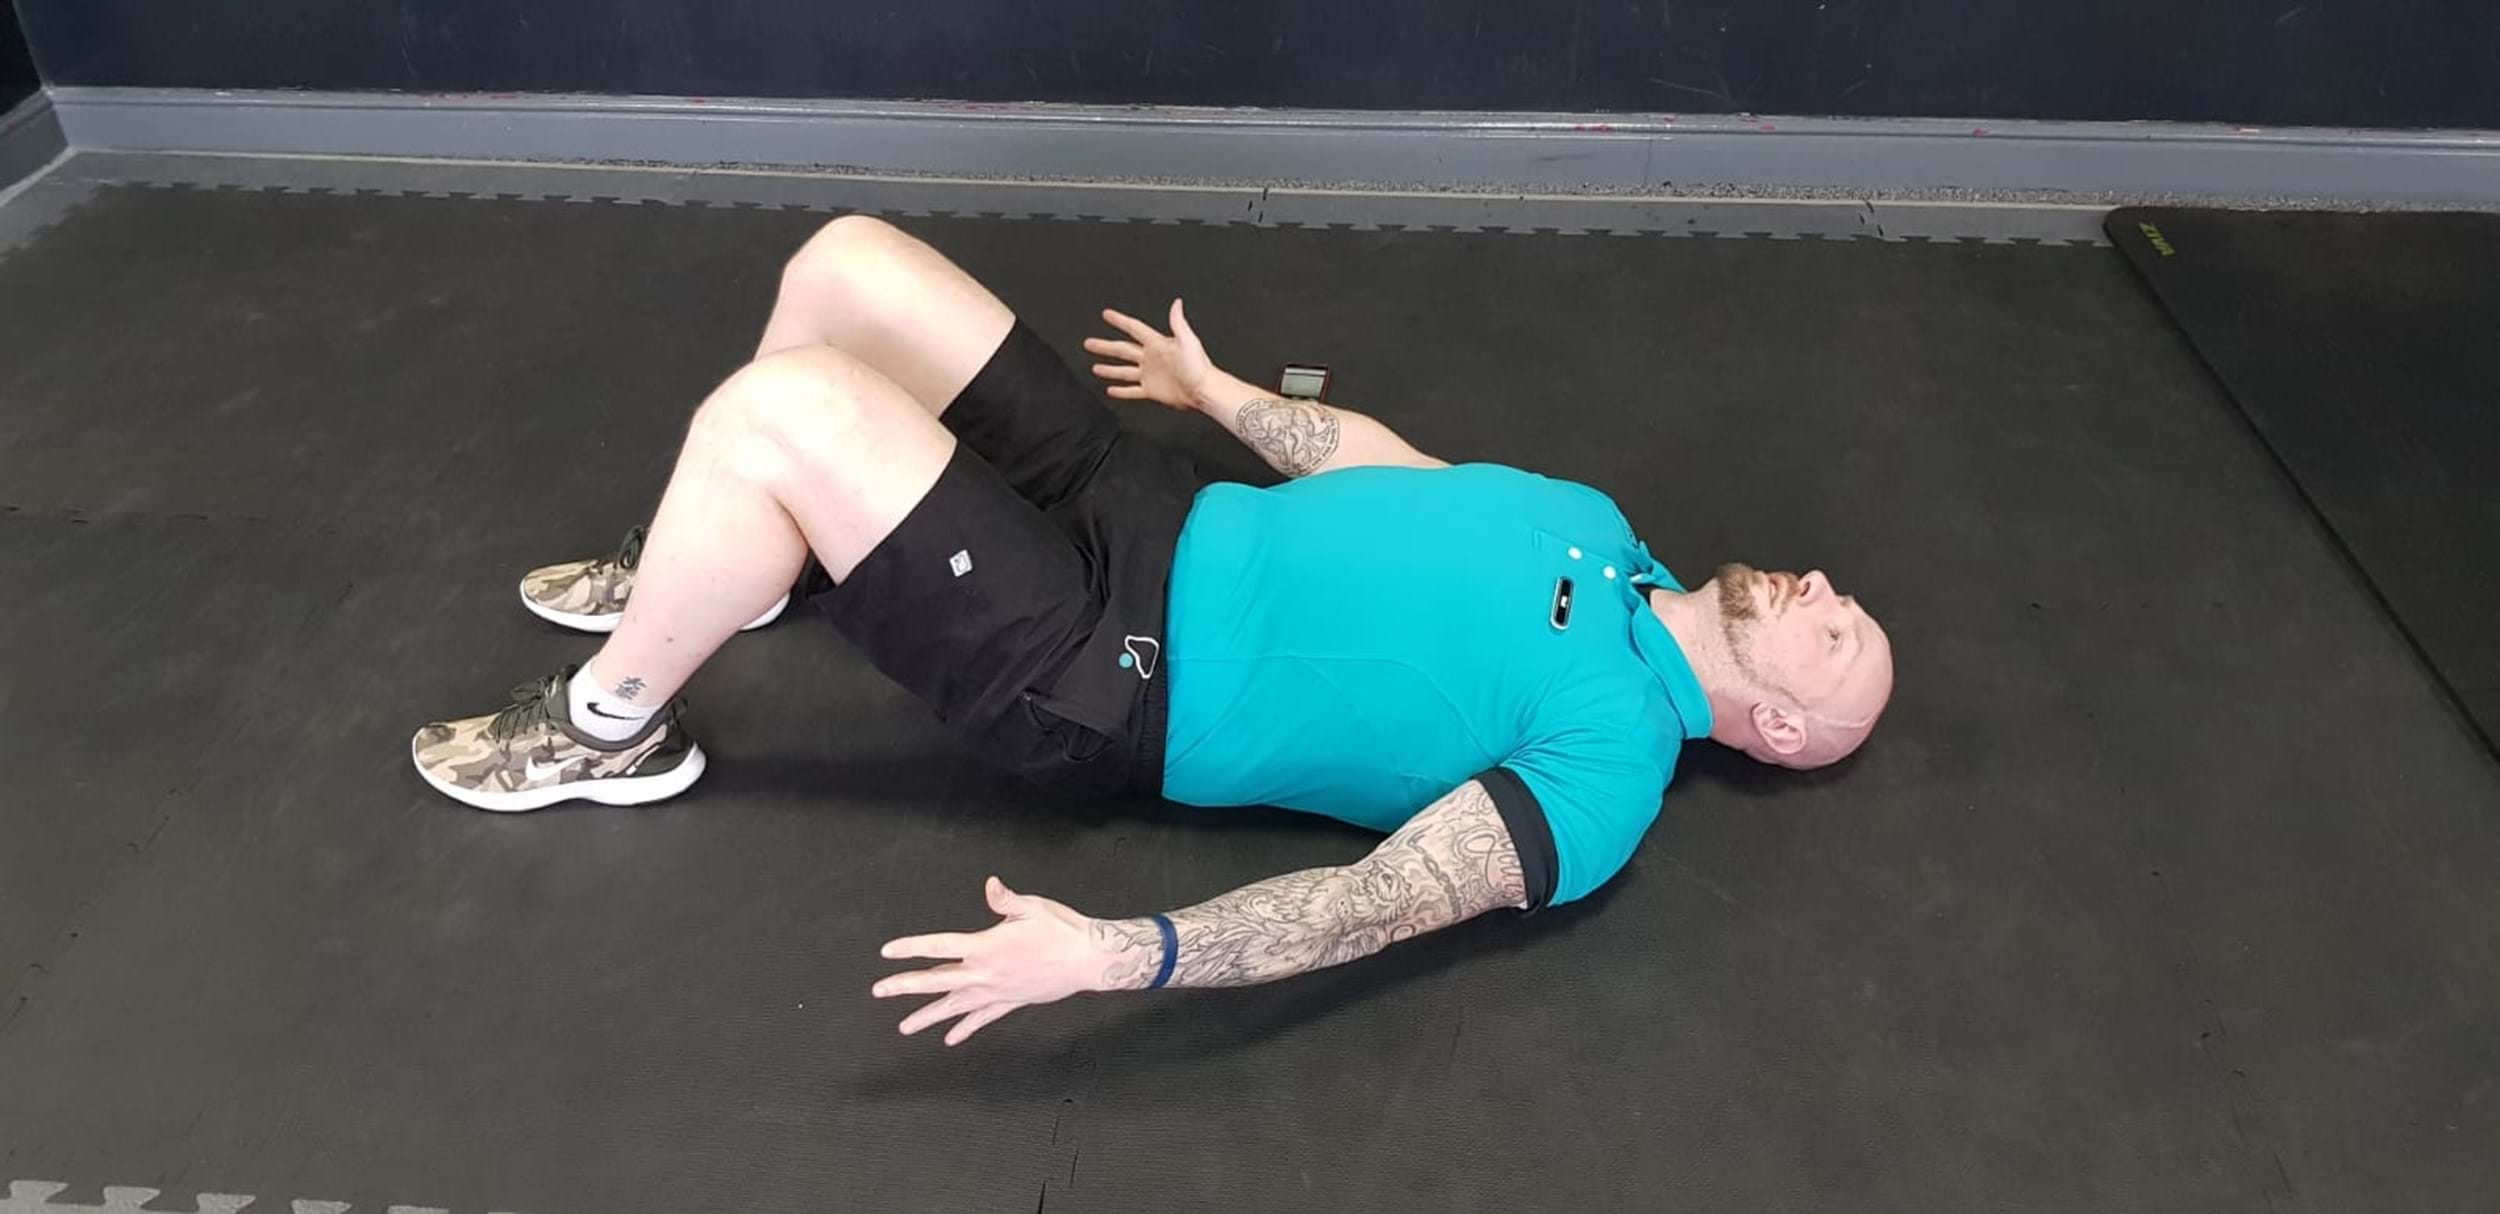 Heel touches ab exercises starting position